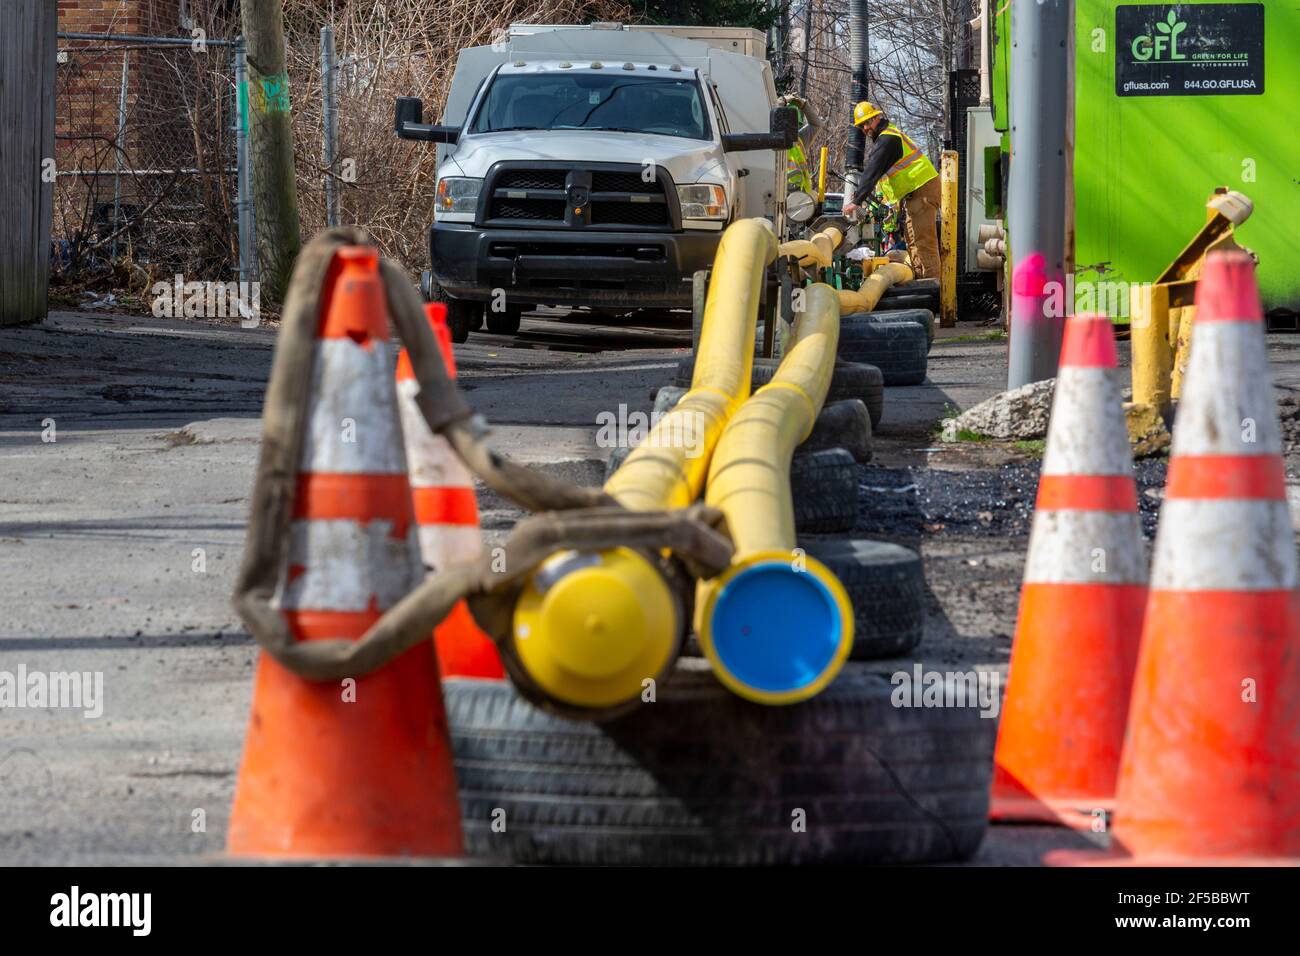 Detroit, Michigan - Workers for DTE Energy replace the original cast iron natural gas mains in the Morningside neighborhood. Stock Photo